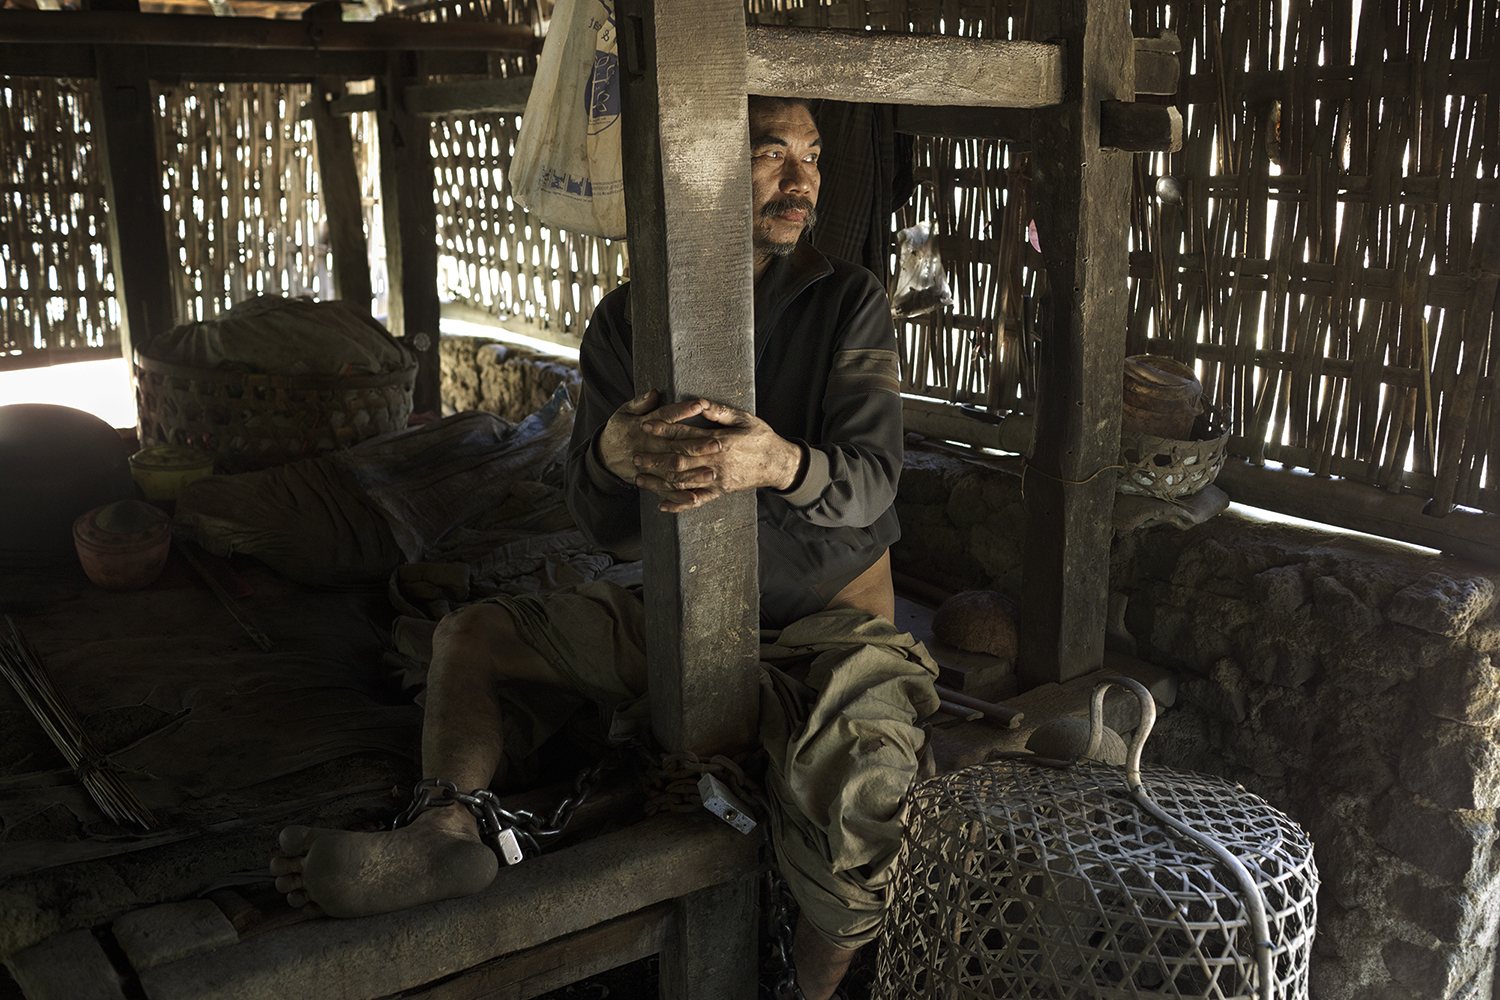 Gede, living chained to a post in a shed behind his mother’s home in a remote area of Bali, was reported to the Suriani Foundation. Dr. Suriani founded one of the rare, perhaps the only, outreach programs in Indonesia involving home visits by a psychiatrist.